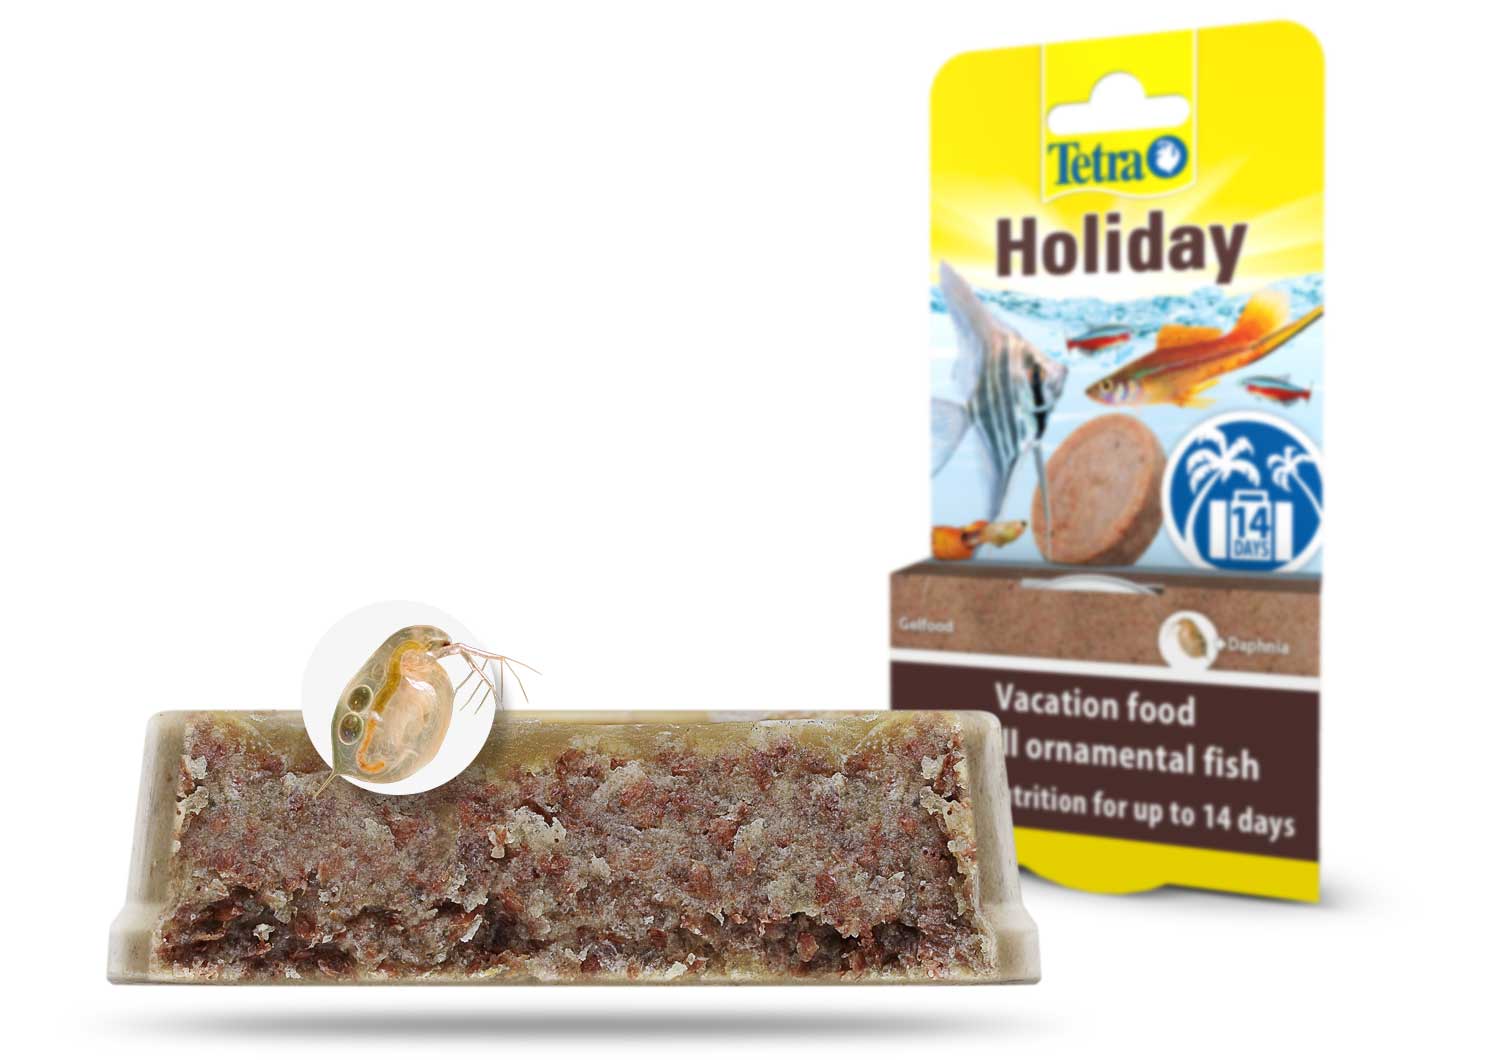 Tetra UK - When using Tetra Holiday food, it's important to